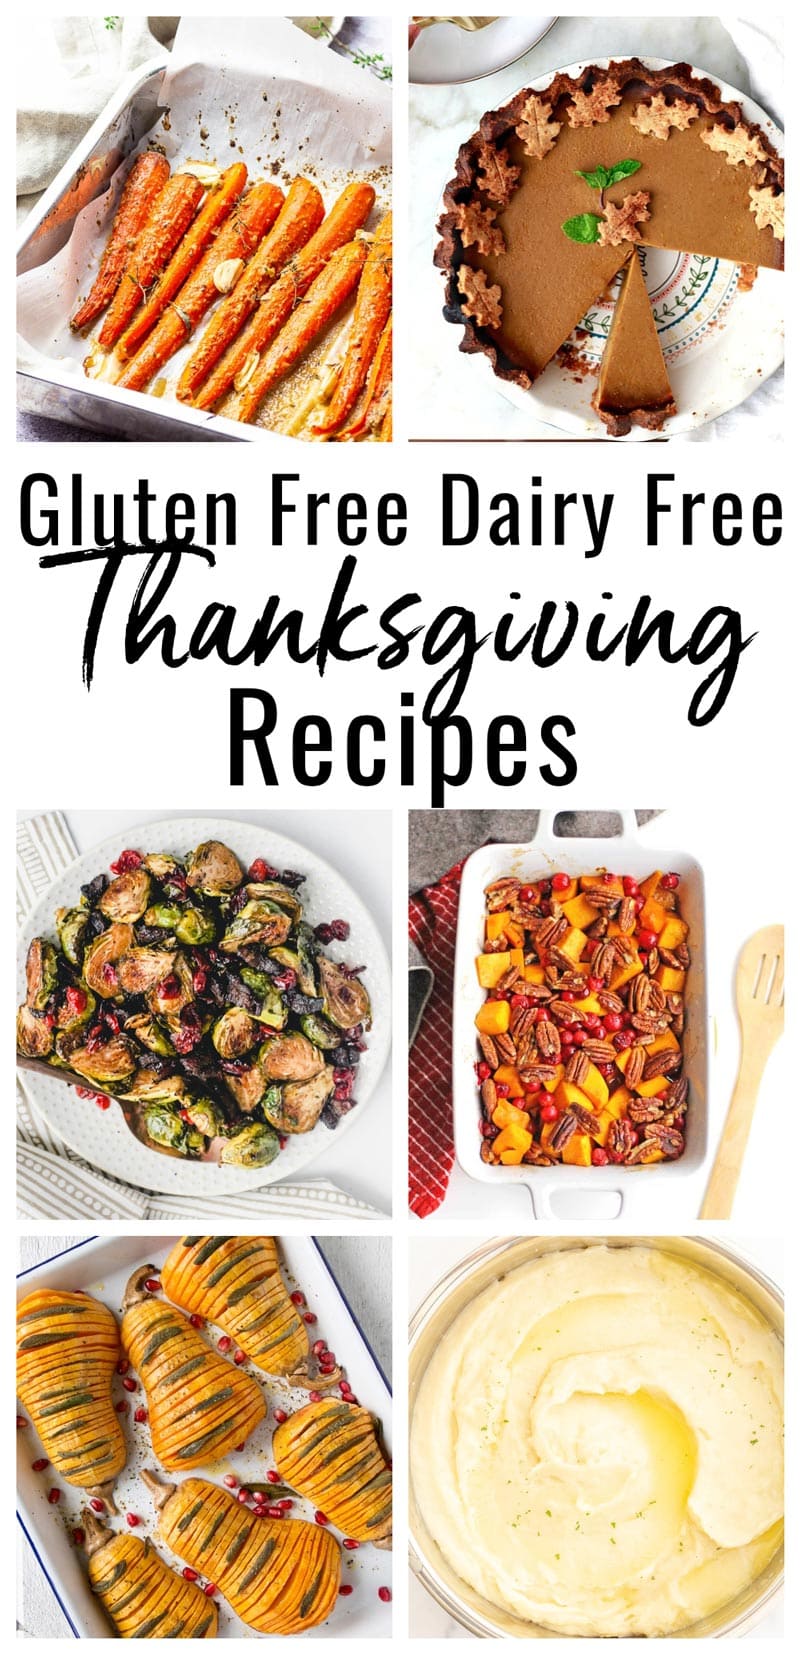 photo collage of gluten free and dairy free thanksgiving recipes and holiday recipes